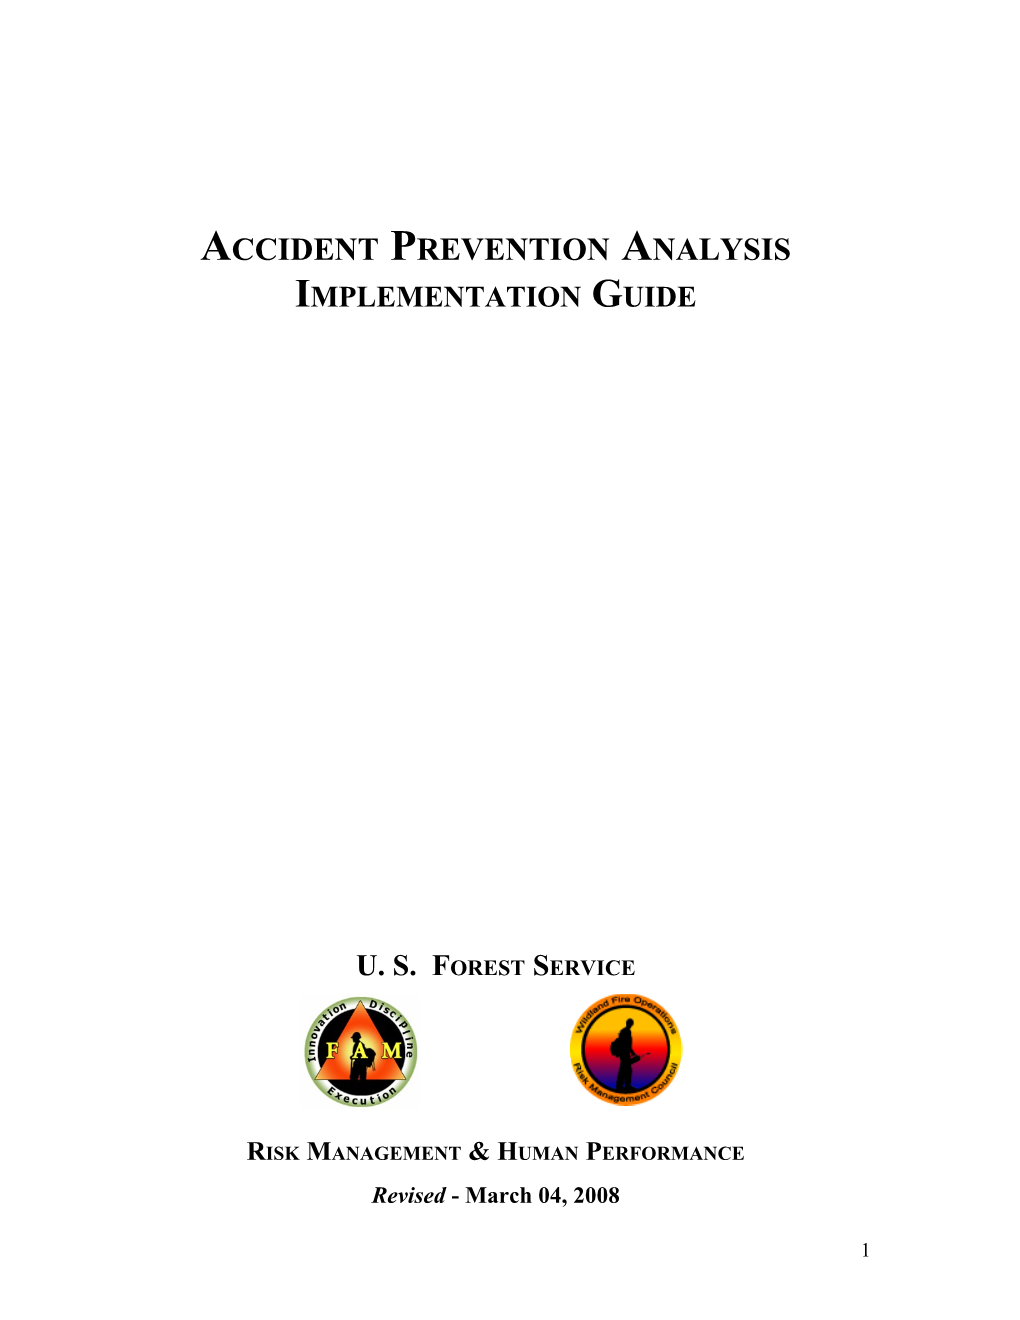 Accident Prevention Analysis Guide W/ Cover